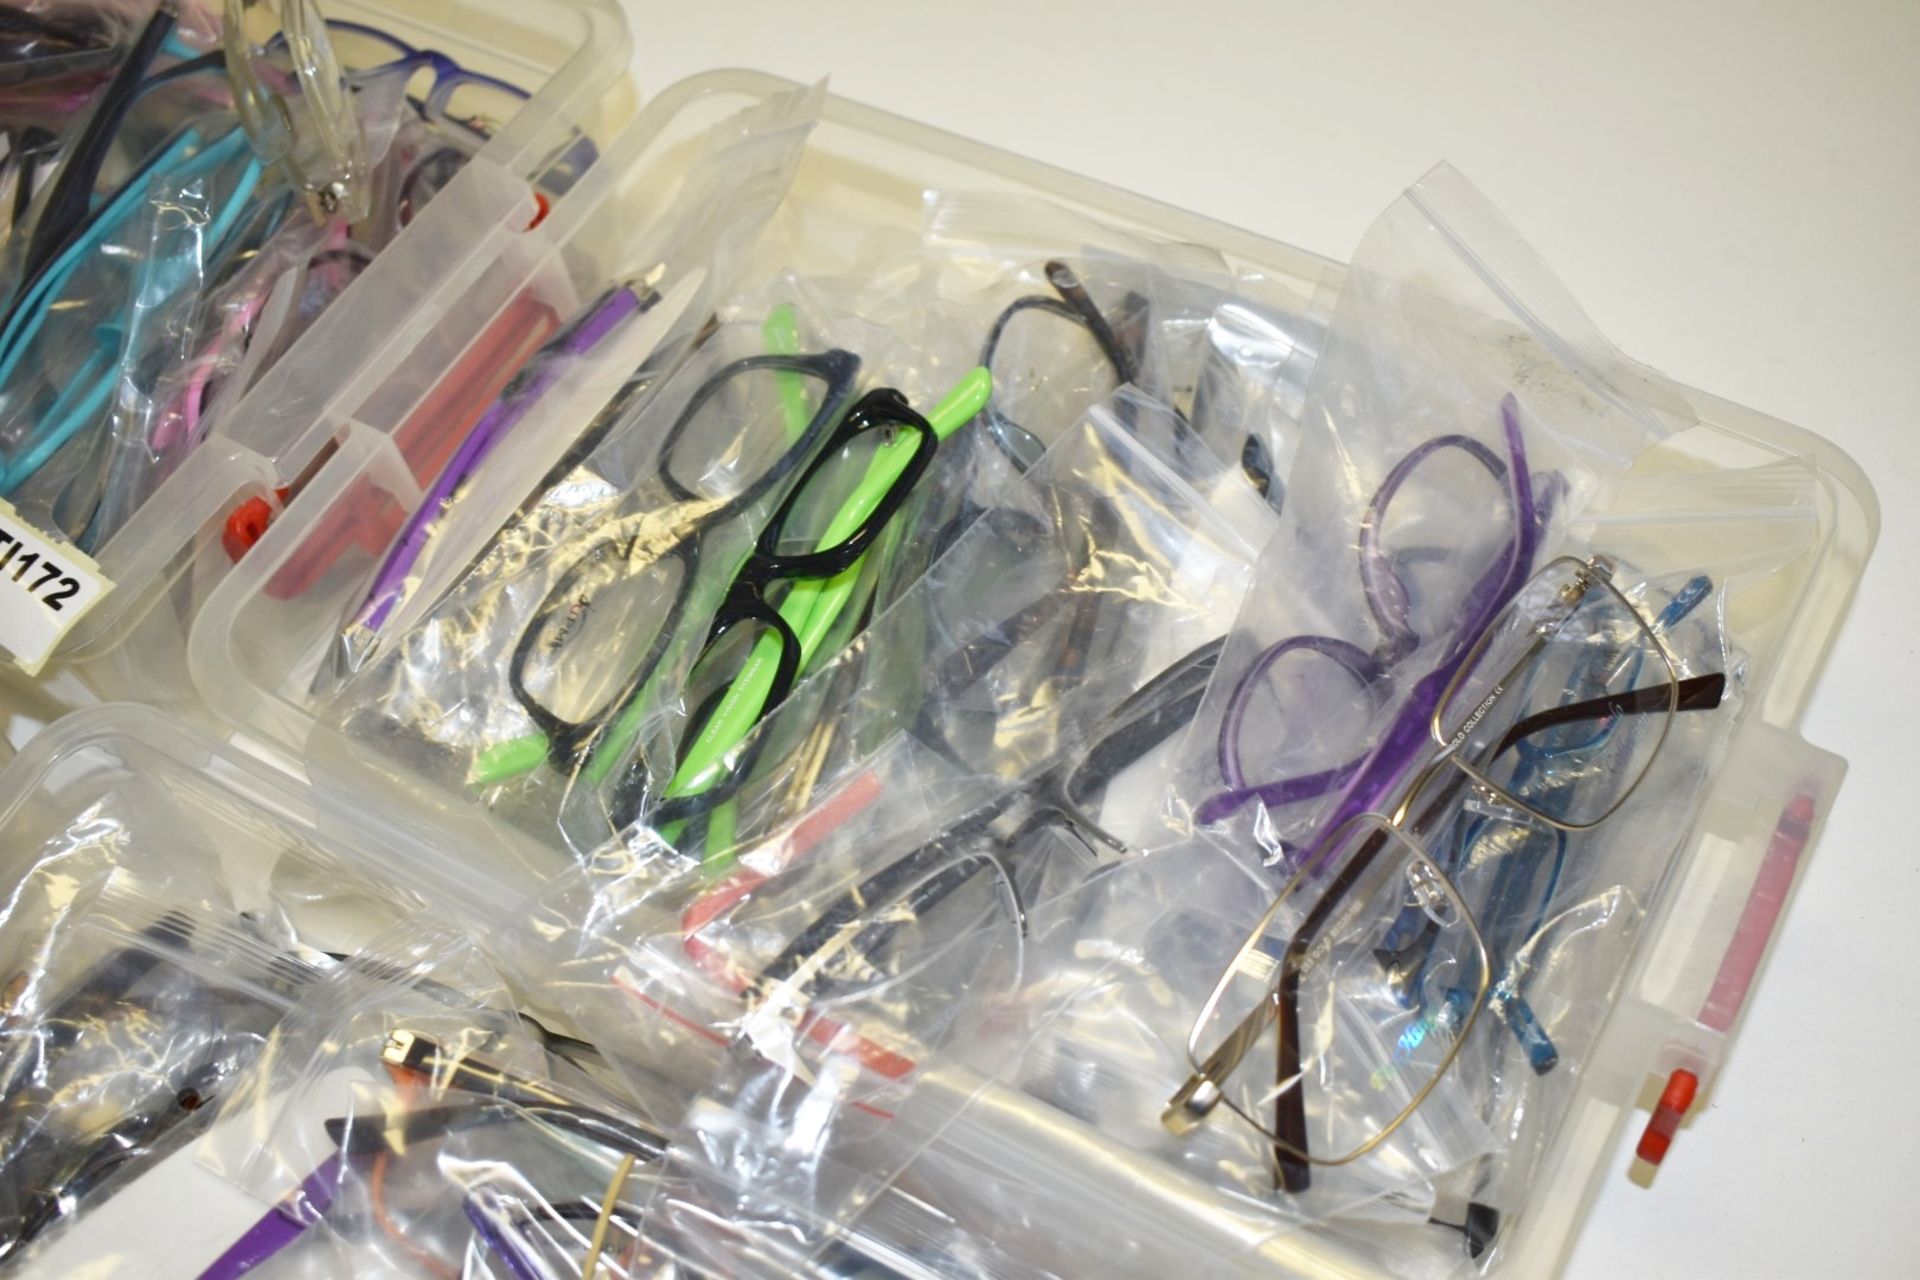 100 x Assorted Pairs of Spectacle Eye Glasses - New and Unused Stock - Various Designs and Brands - Image 5 of 19